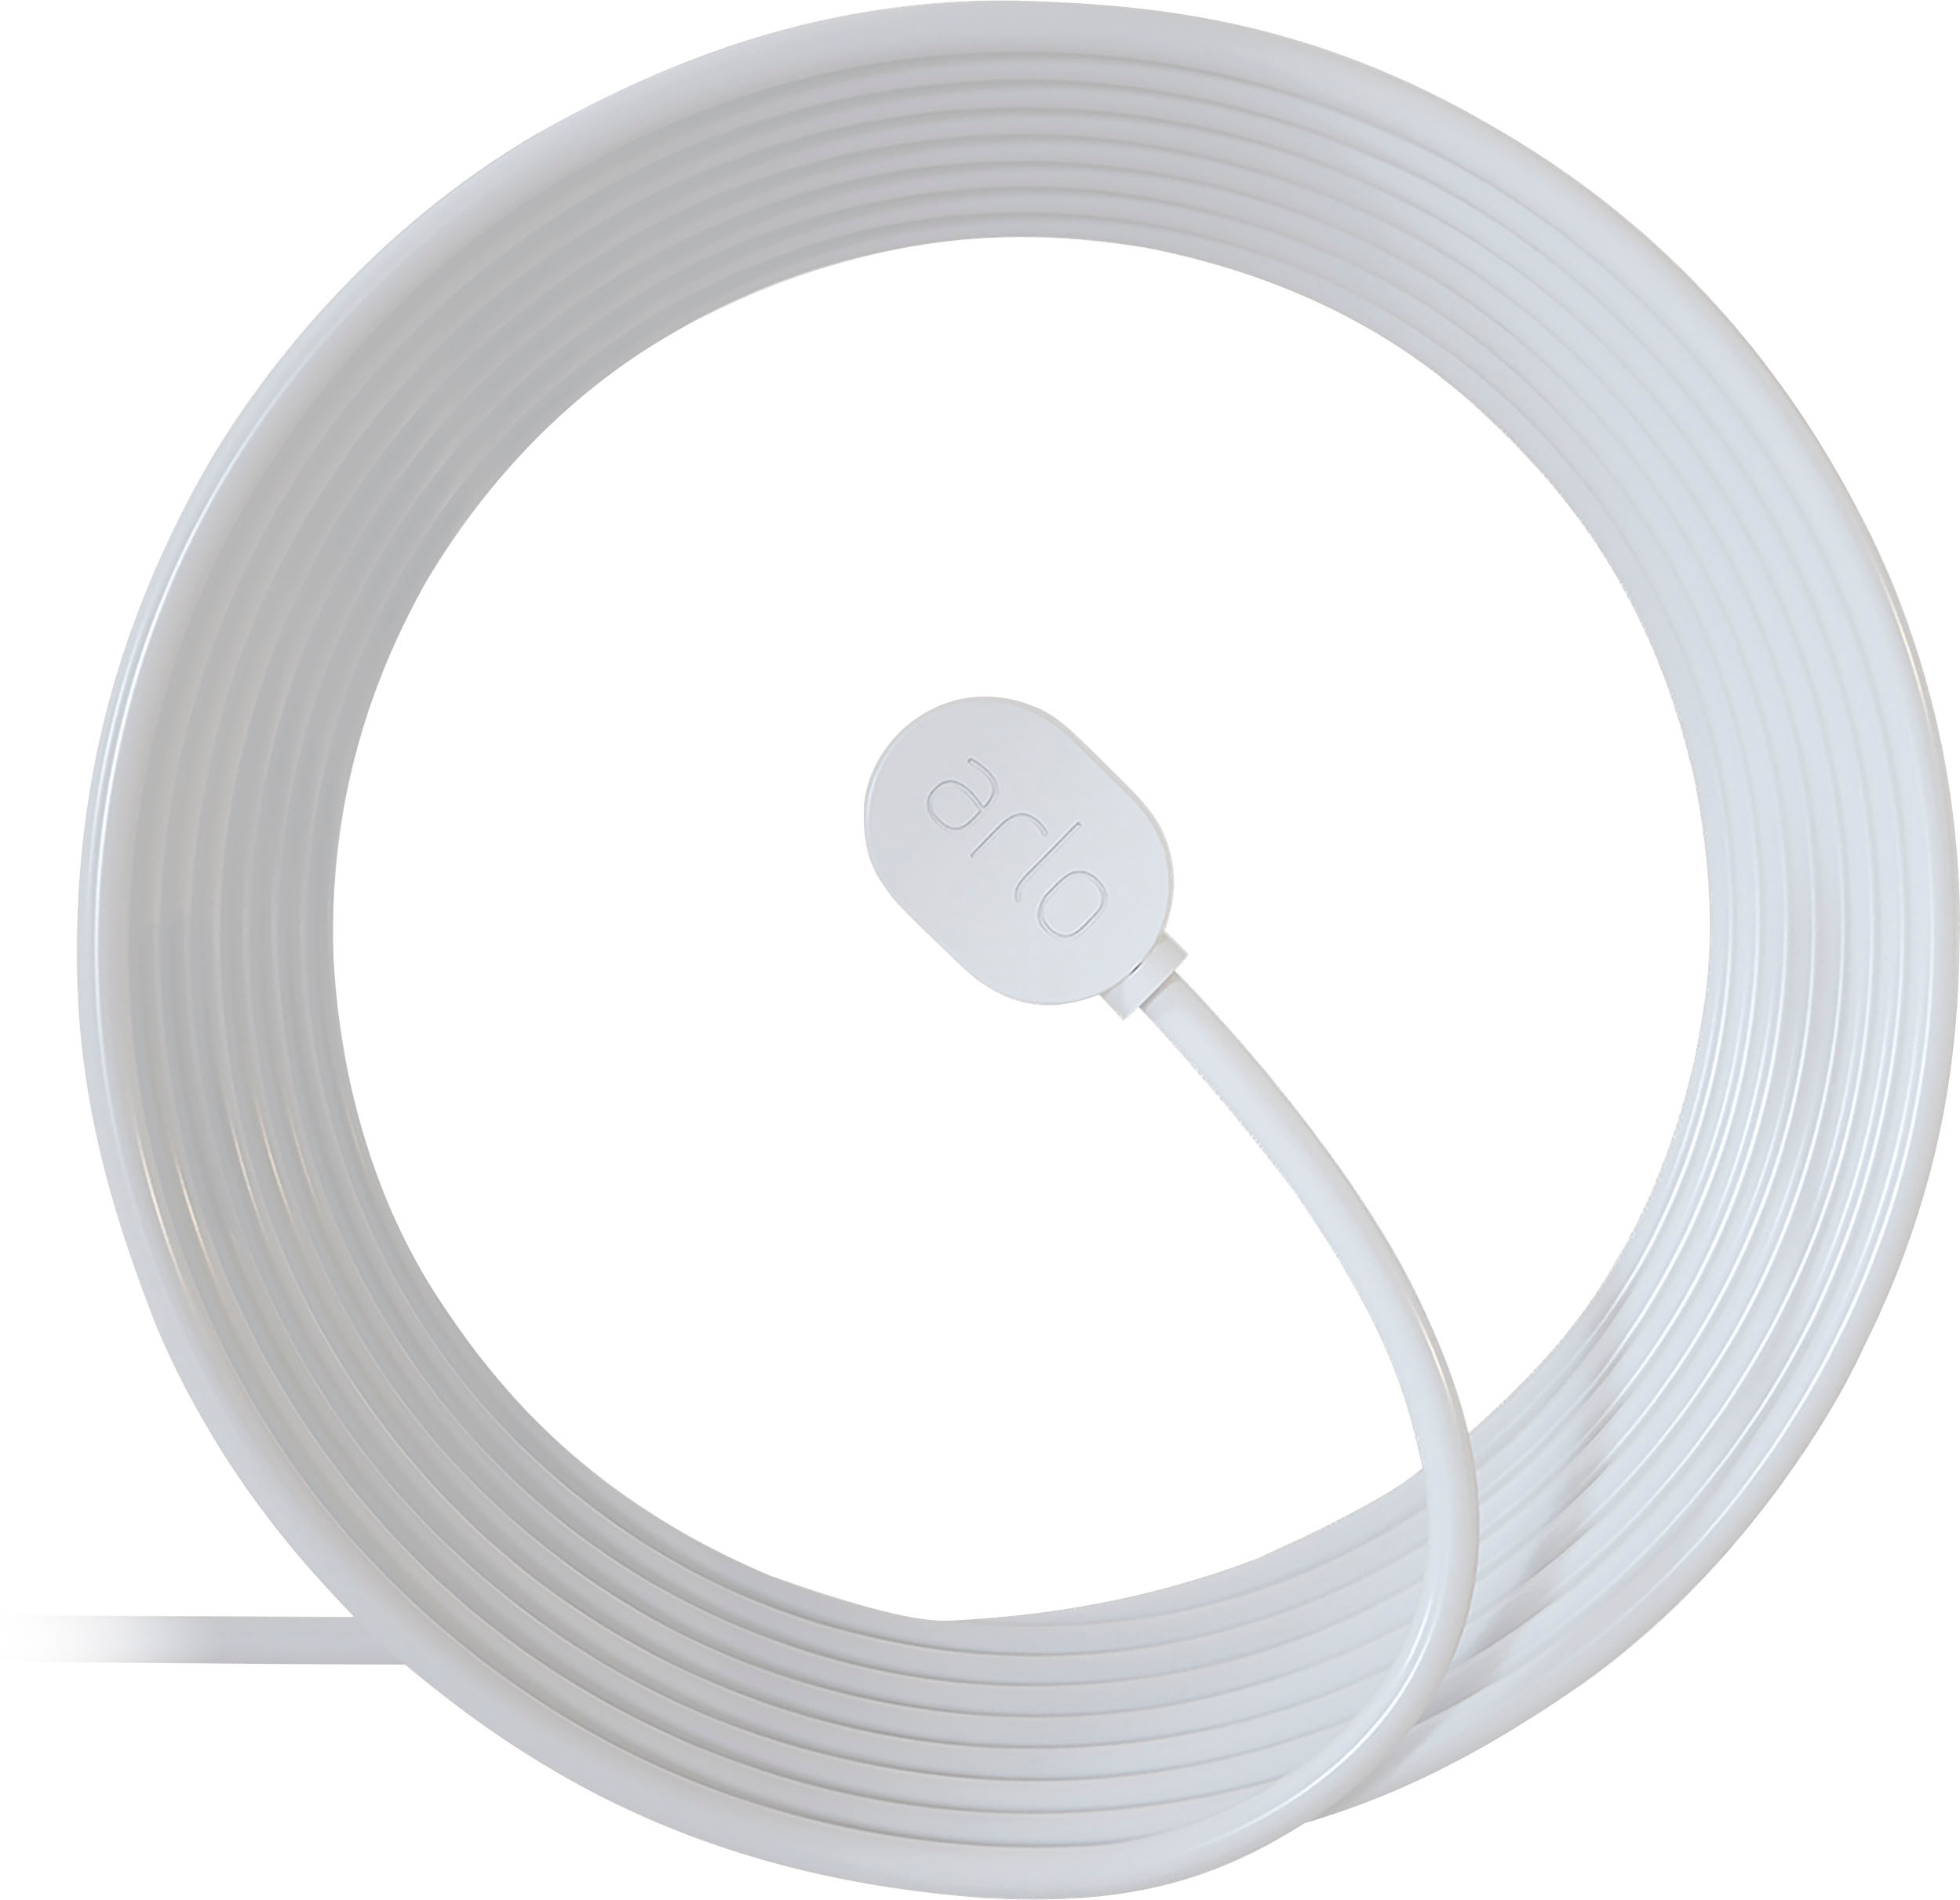 25' Outdoor Magnetic Charging Cable for Arlo Ultra and Pro 3 Security Cameras - White